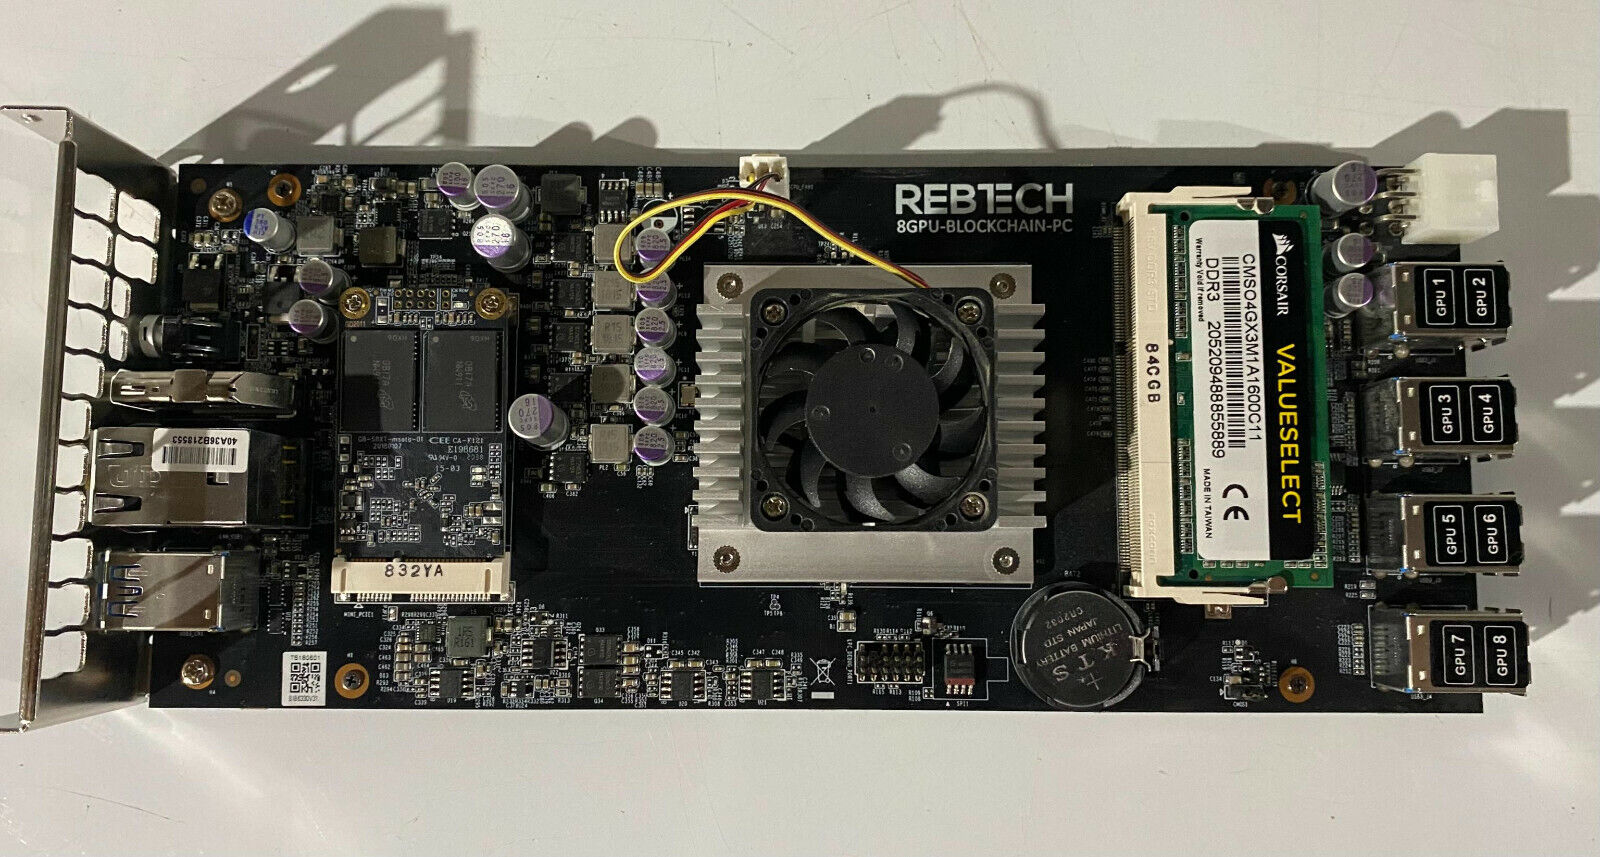 REBTECH ALL-IN ONE WITH PROCESSOR RAM SSD & MOTHERBOARD - 8 GPU MINING RIG